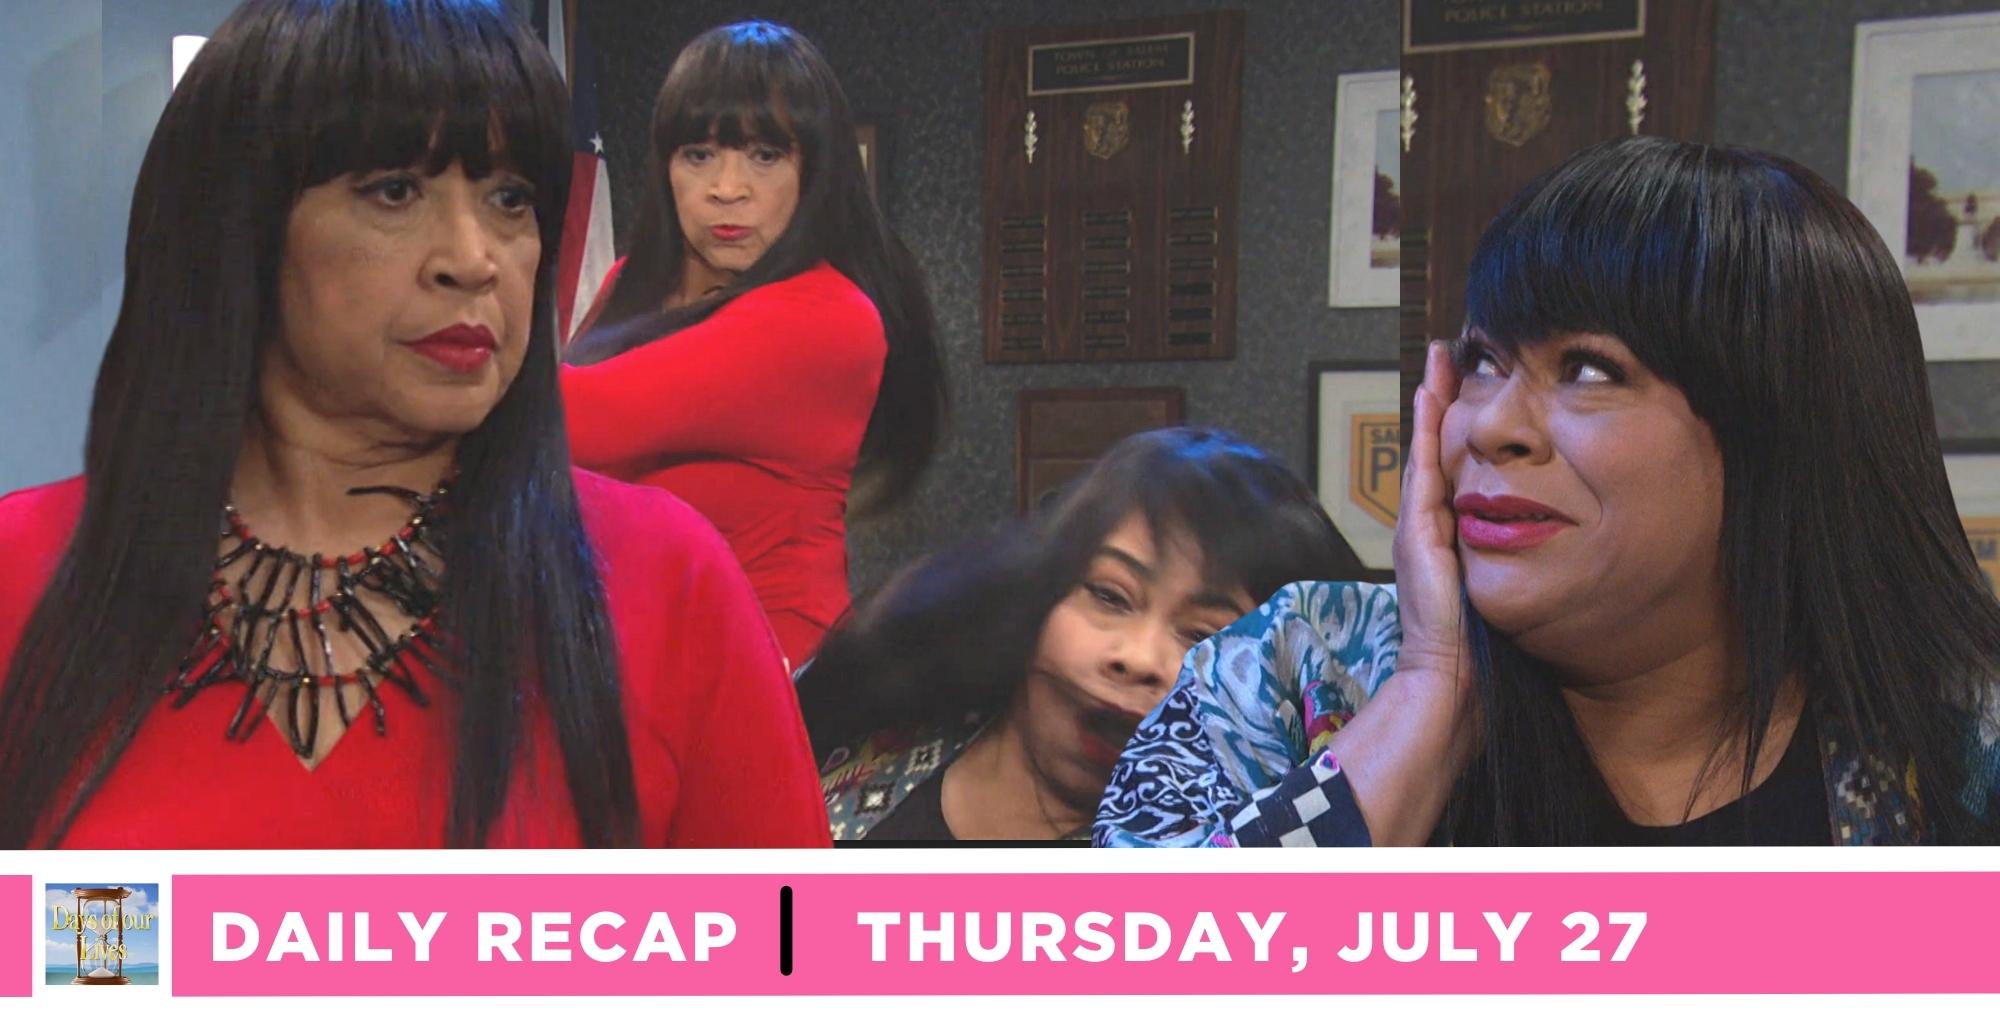 days of our lives recap for thursday, july 27, 2023, main image paulina slapping whitley, insert shots of paulina and whitley.